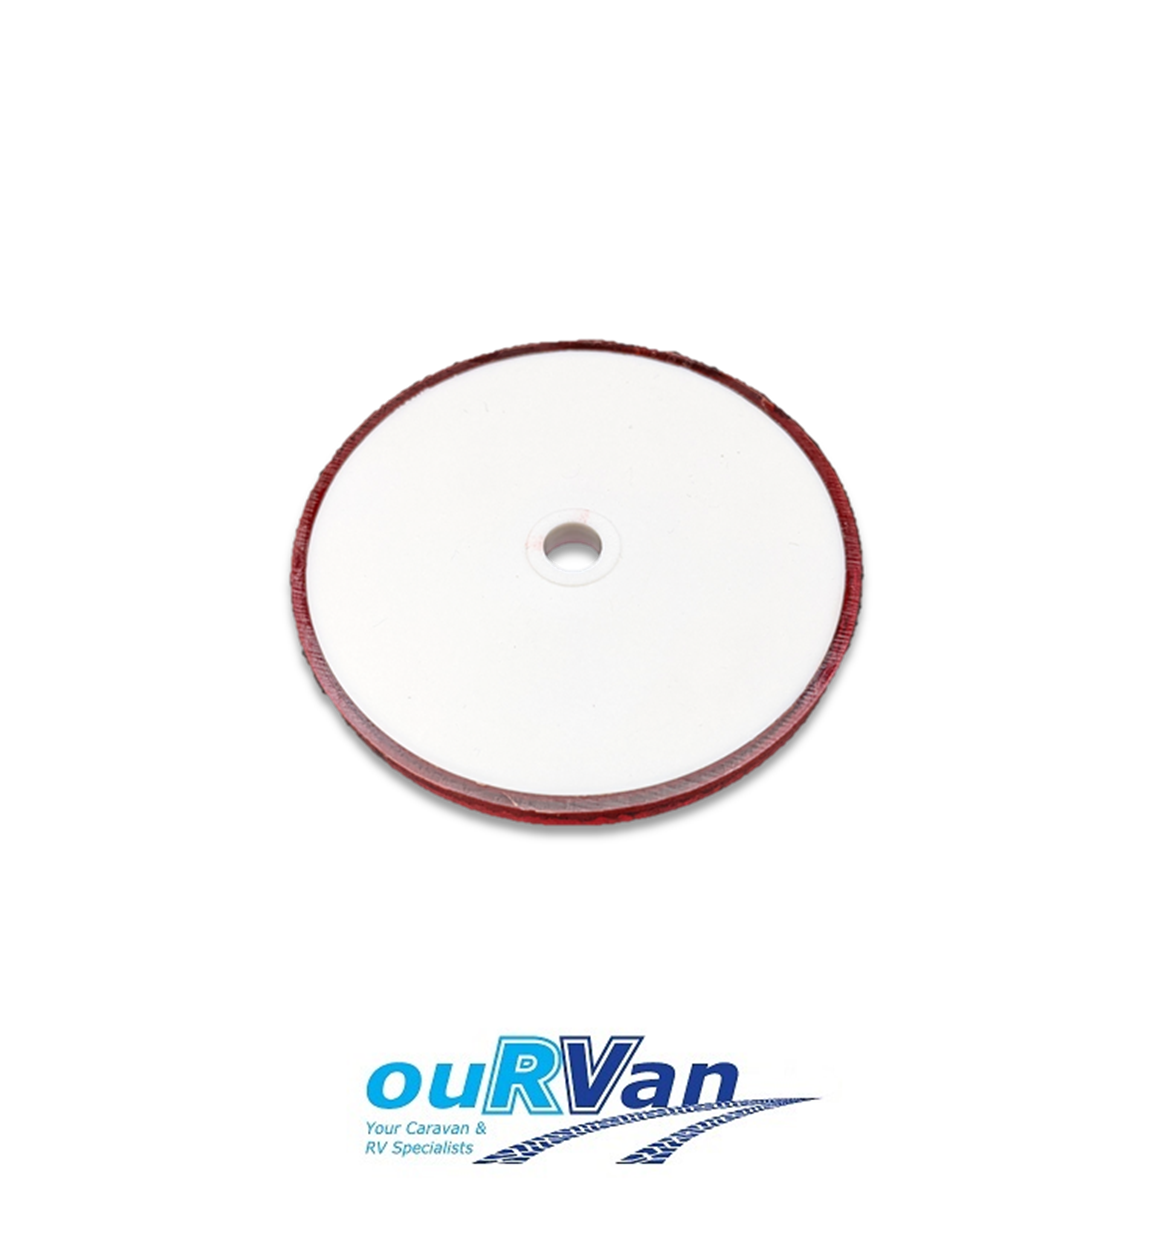 1 x 84012 EQUIVALENT 60mm DIAMETER RED SELF ADHESIVE REFLECTOR